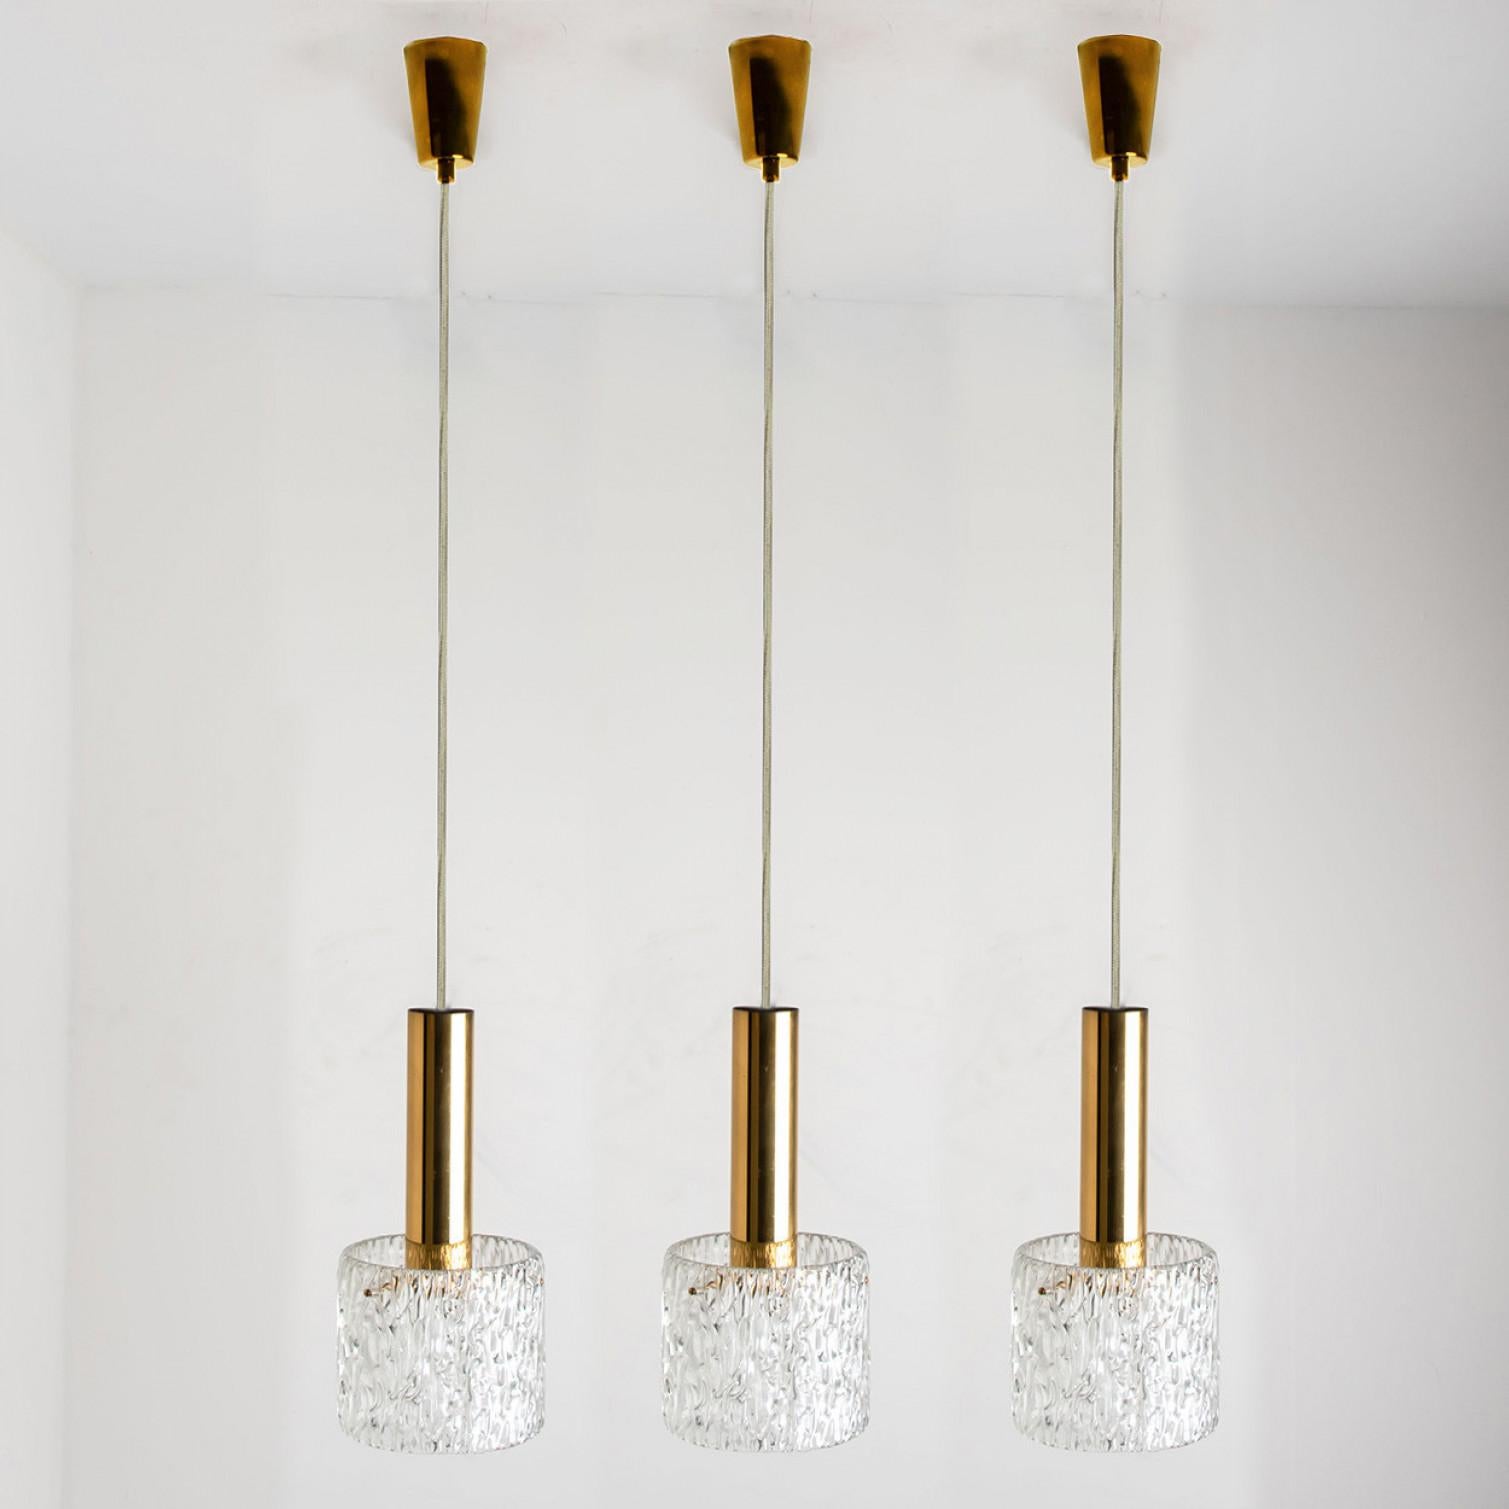 One of the three wave glass pendant lights designed by J.T Kalmar, manufactured by Kalmar, Austria in the 1960s.
Simple yet beautiful design. Each pendant has one wave textured glass shade on a brass base. Providing a soft light.

Dimensions:
Height